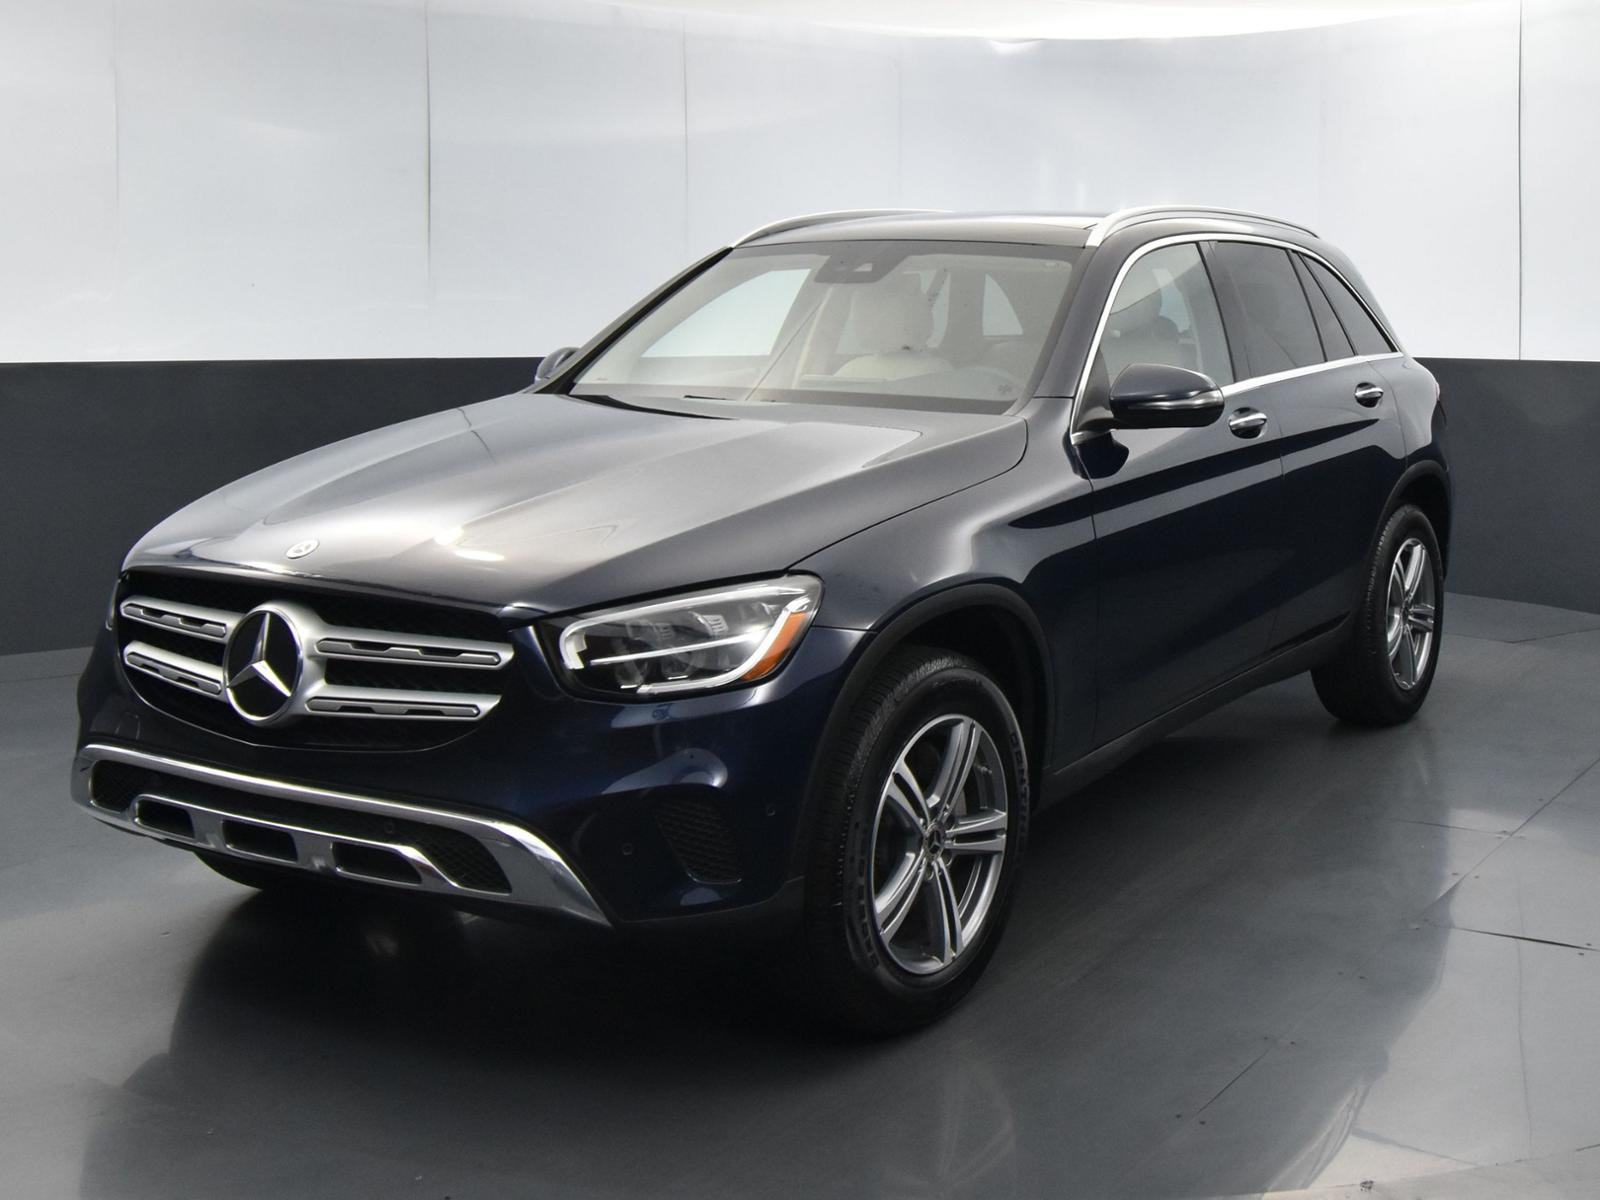 Pre-Owned 2021 Mercedes-Benz GLC GLC 300 4MATIC® SUV Sport Utility in  Beaumont #MF930100 | Mike Smith Honda